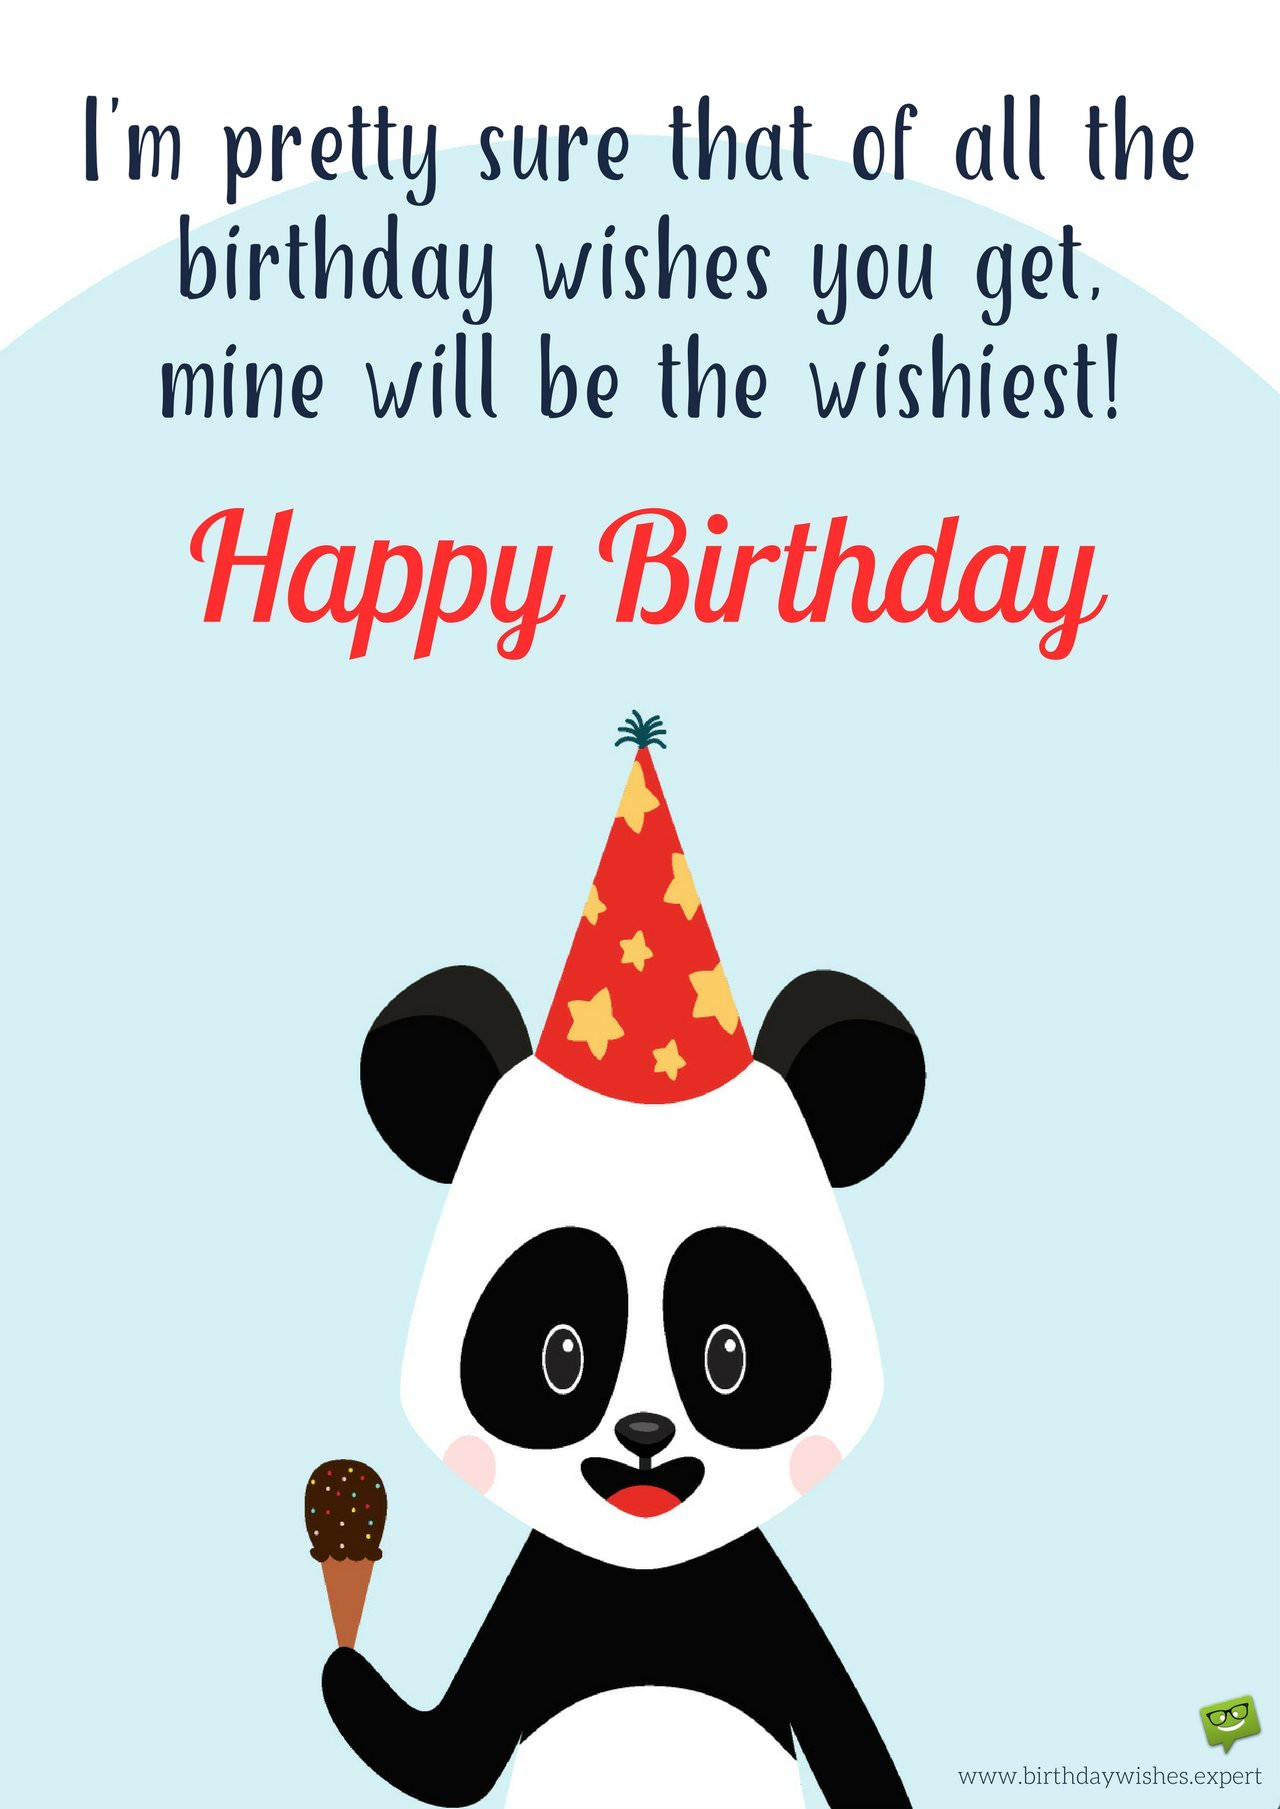 Funny Birthday Quotes For Wife
 The Funniest Wishes to Make your Wife Smile on her Birthday